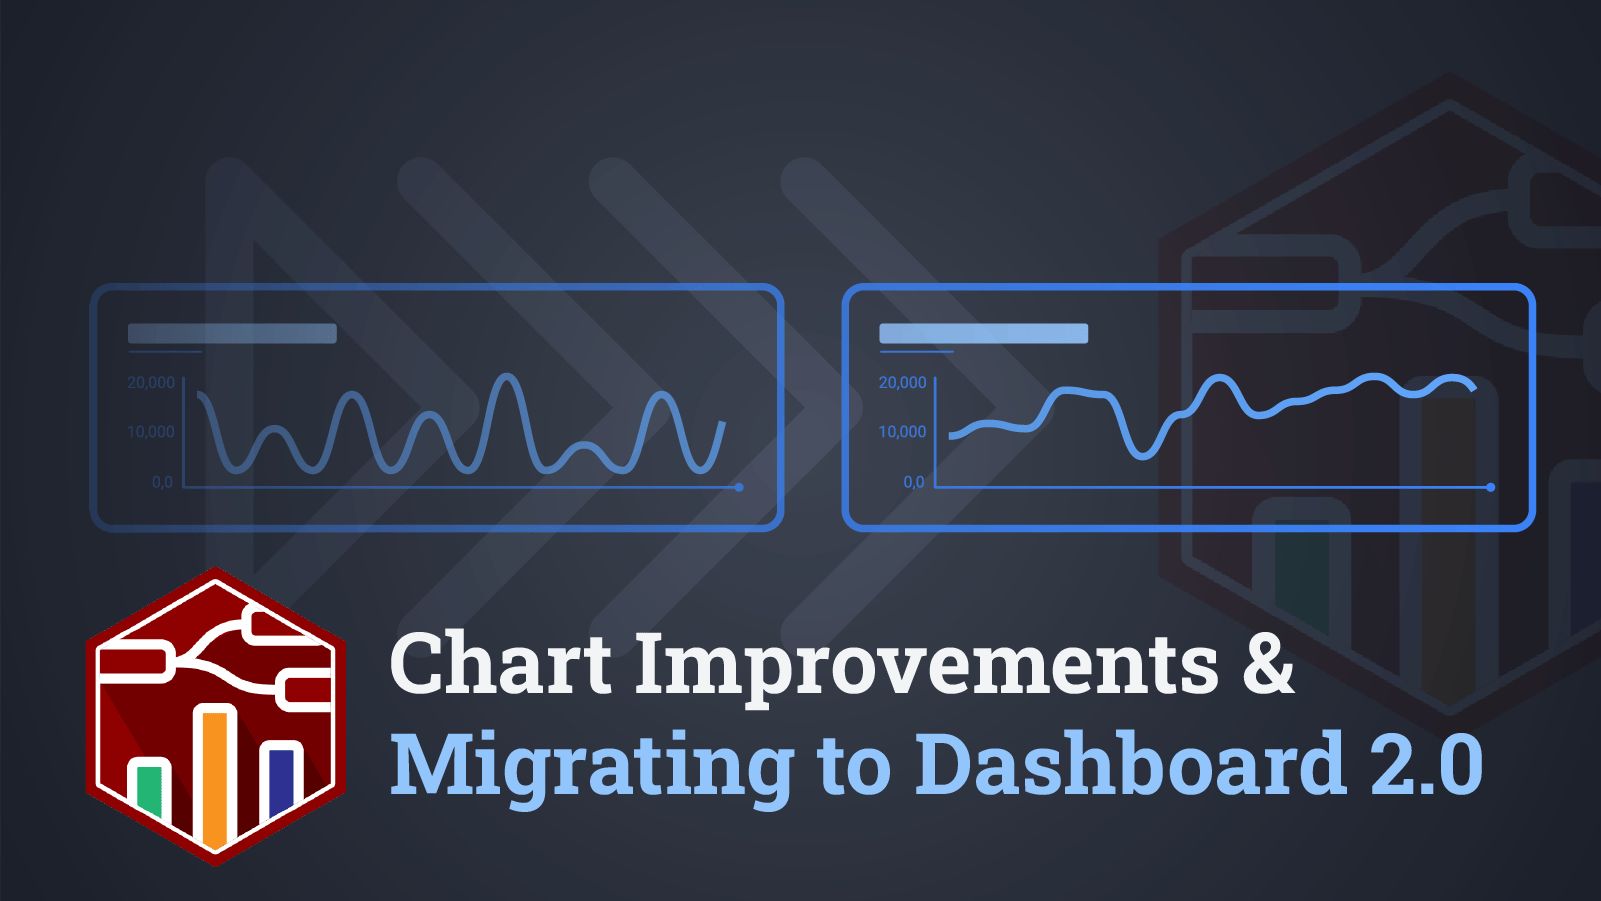 Image representing Chart Improvements & Migrating to Dashboard 2.0